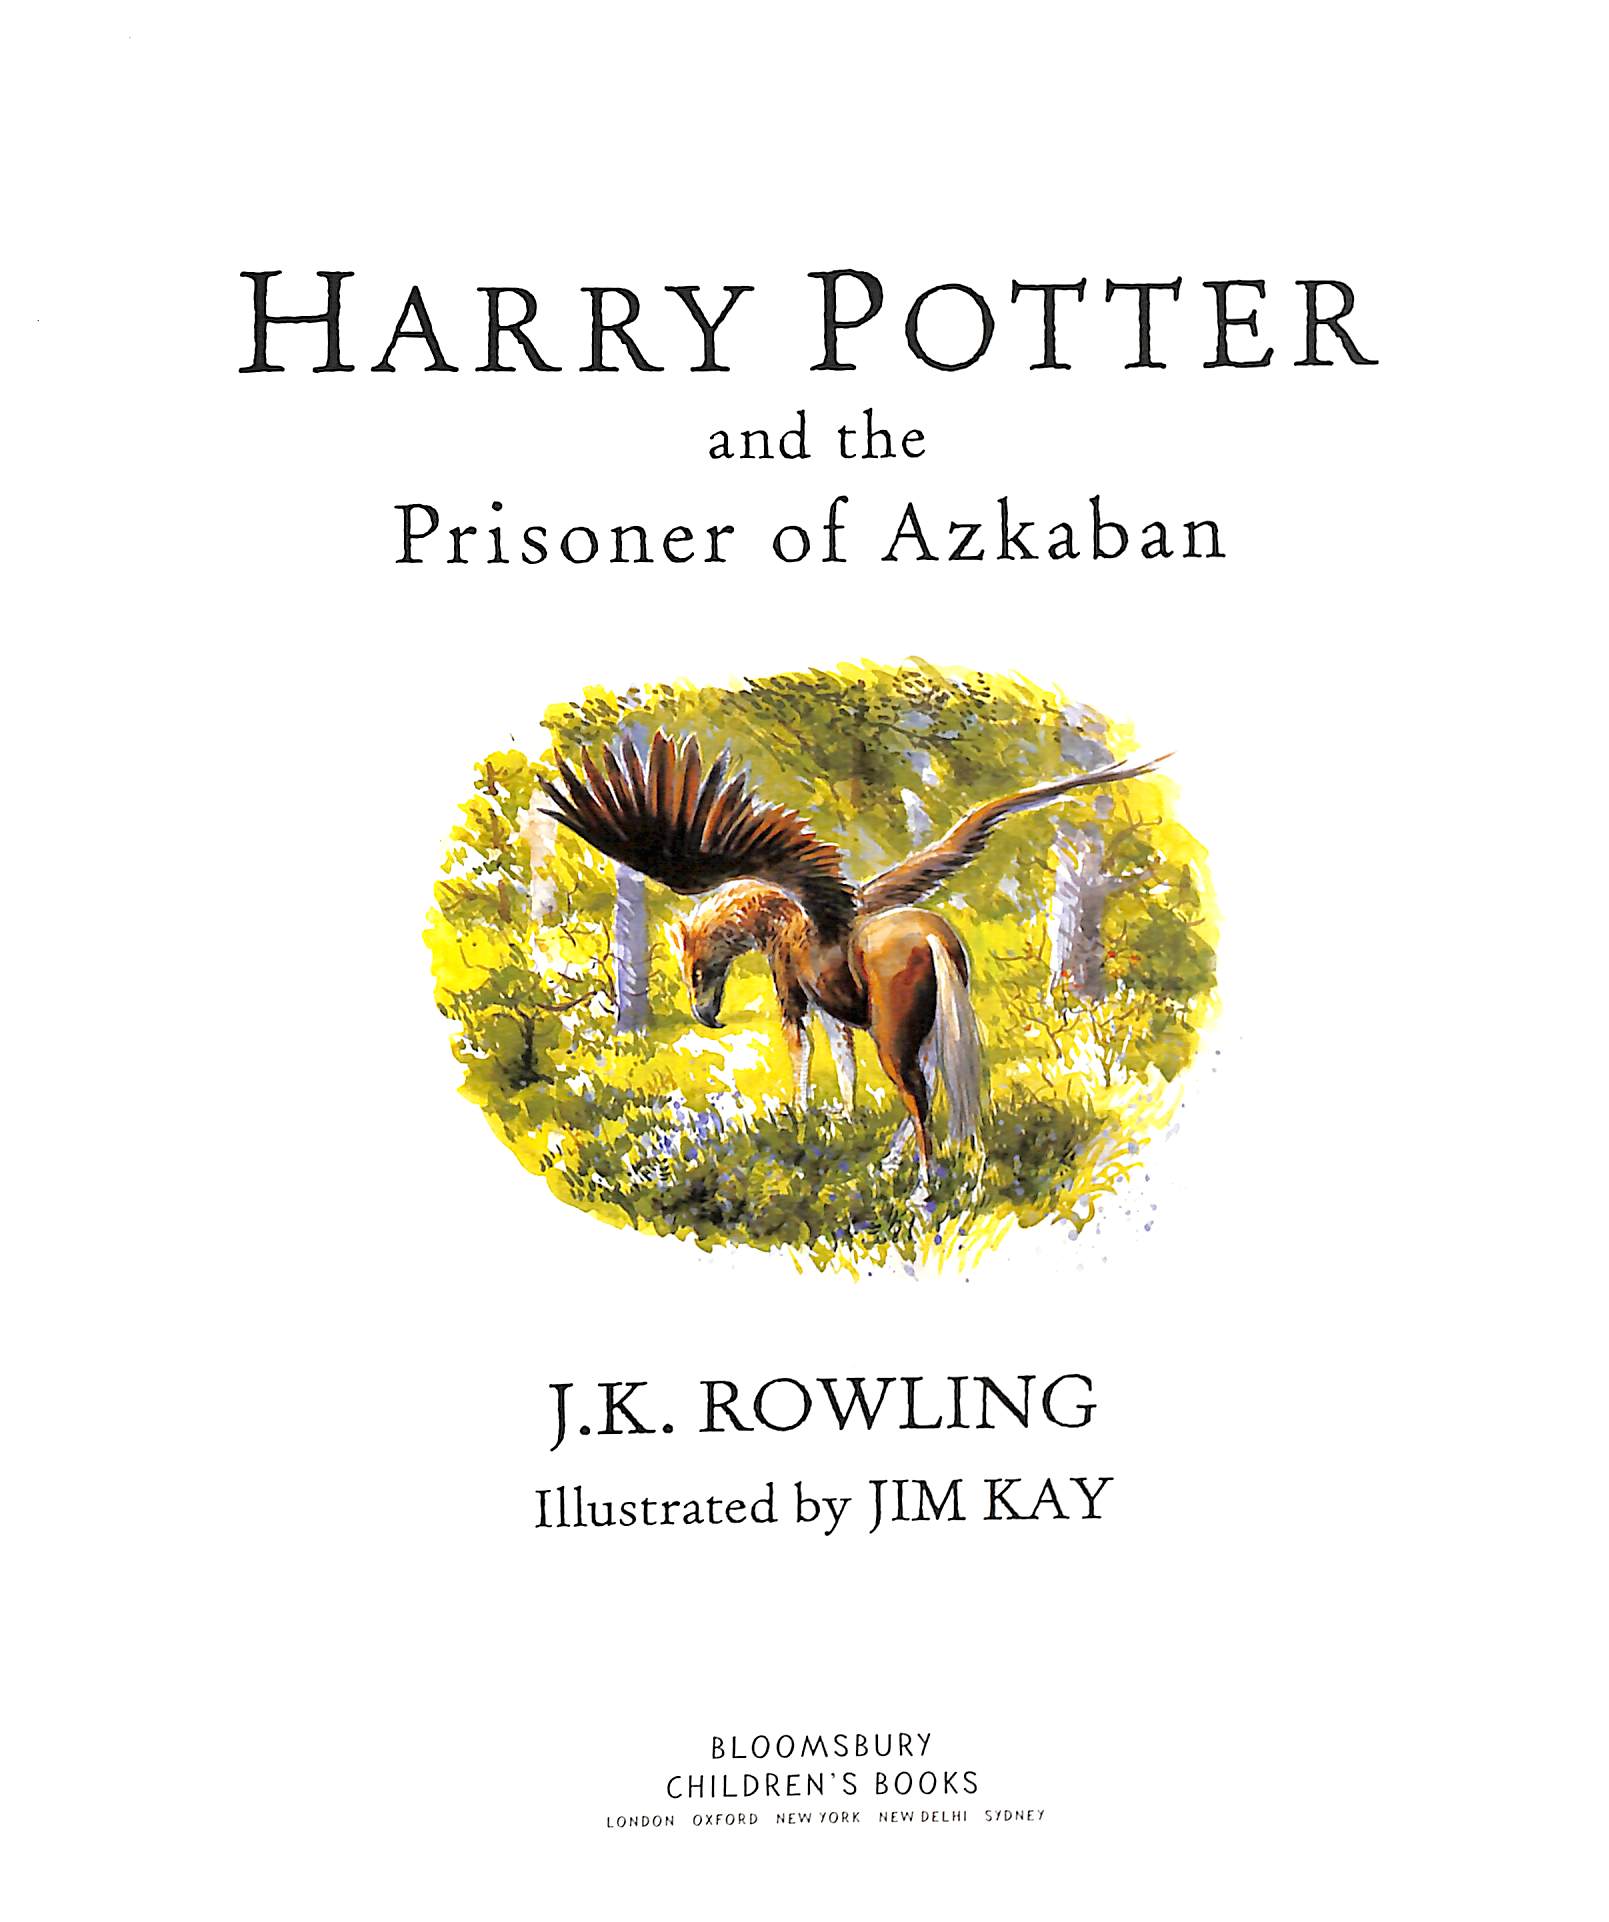 harry potter and the prisoner of azkaban book review